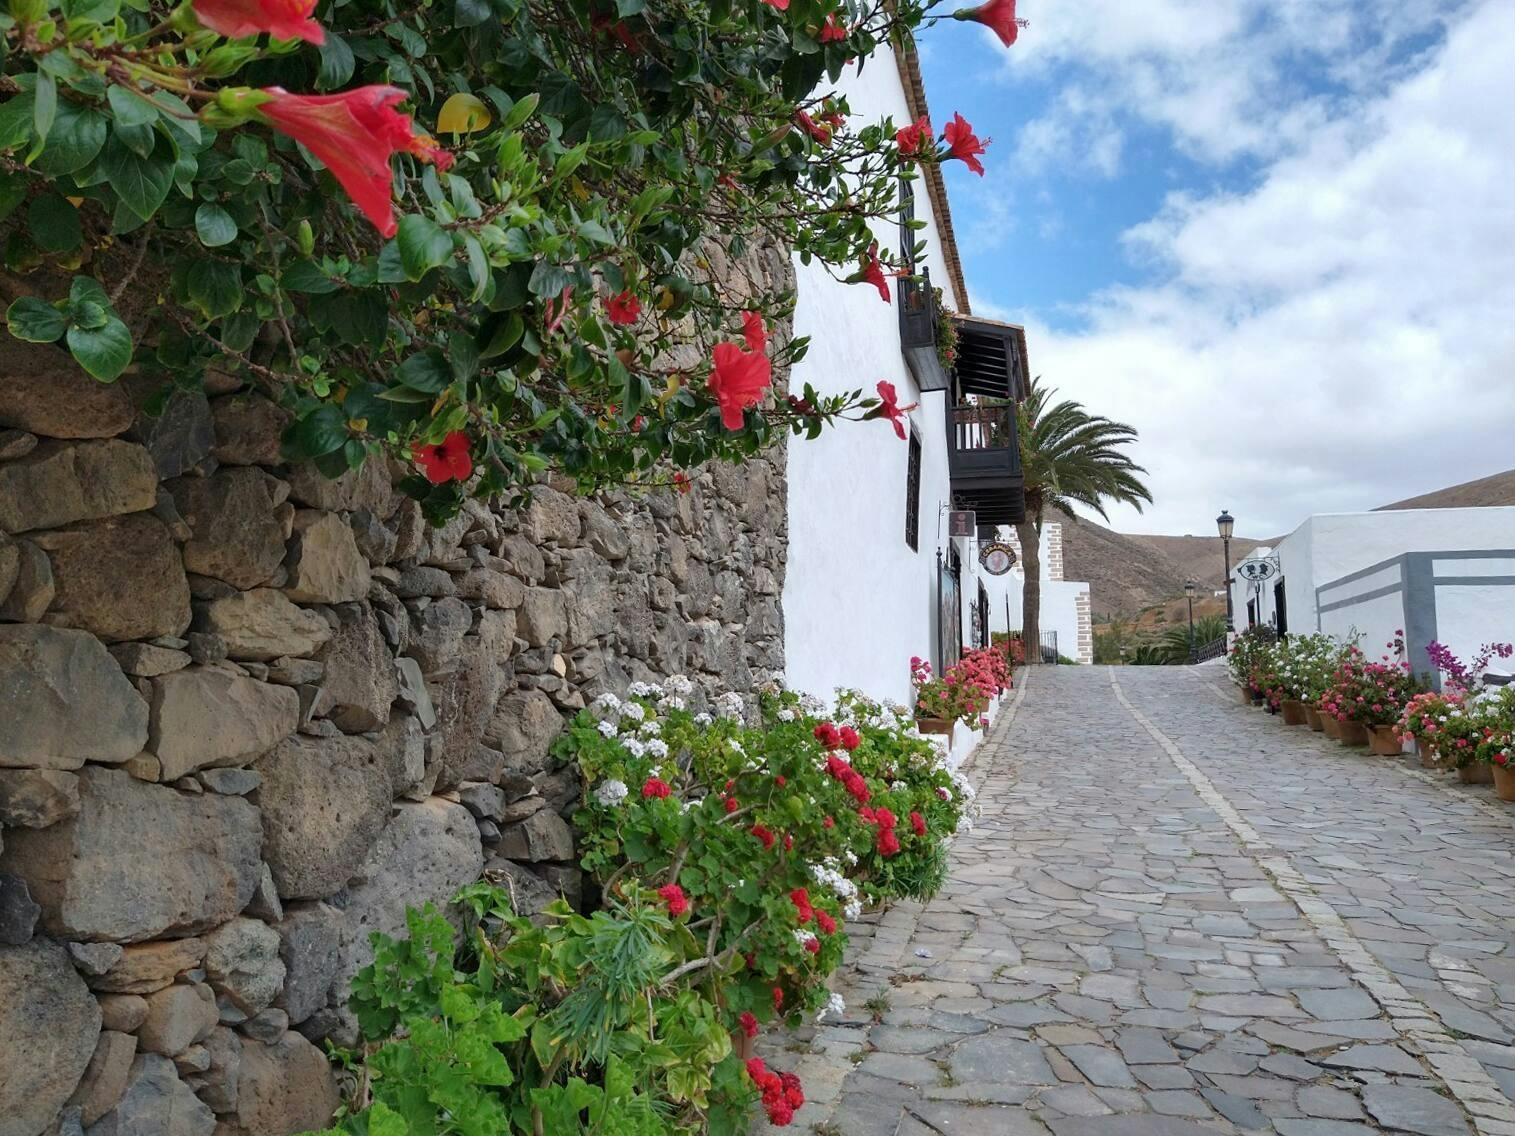 Fuerteventura Small Group Tour with tapas and wine